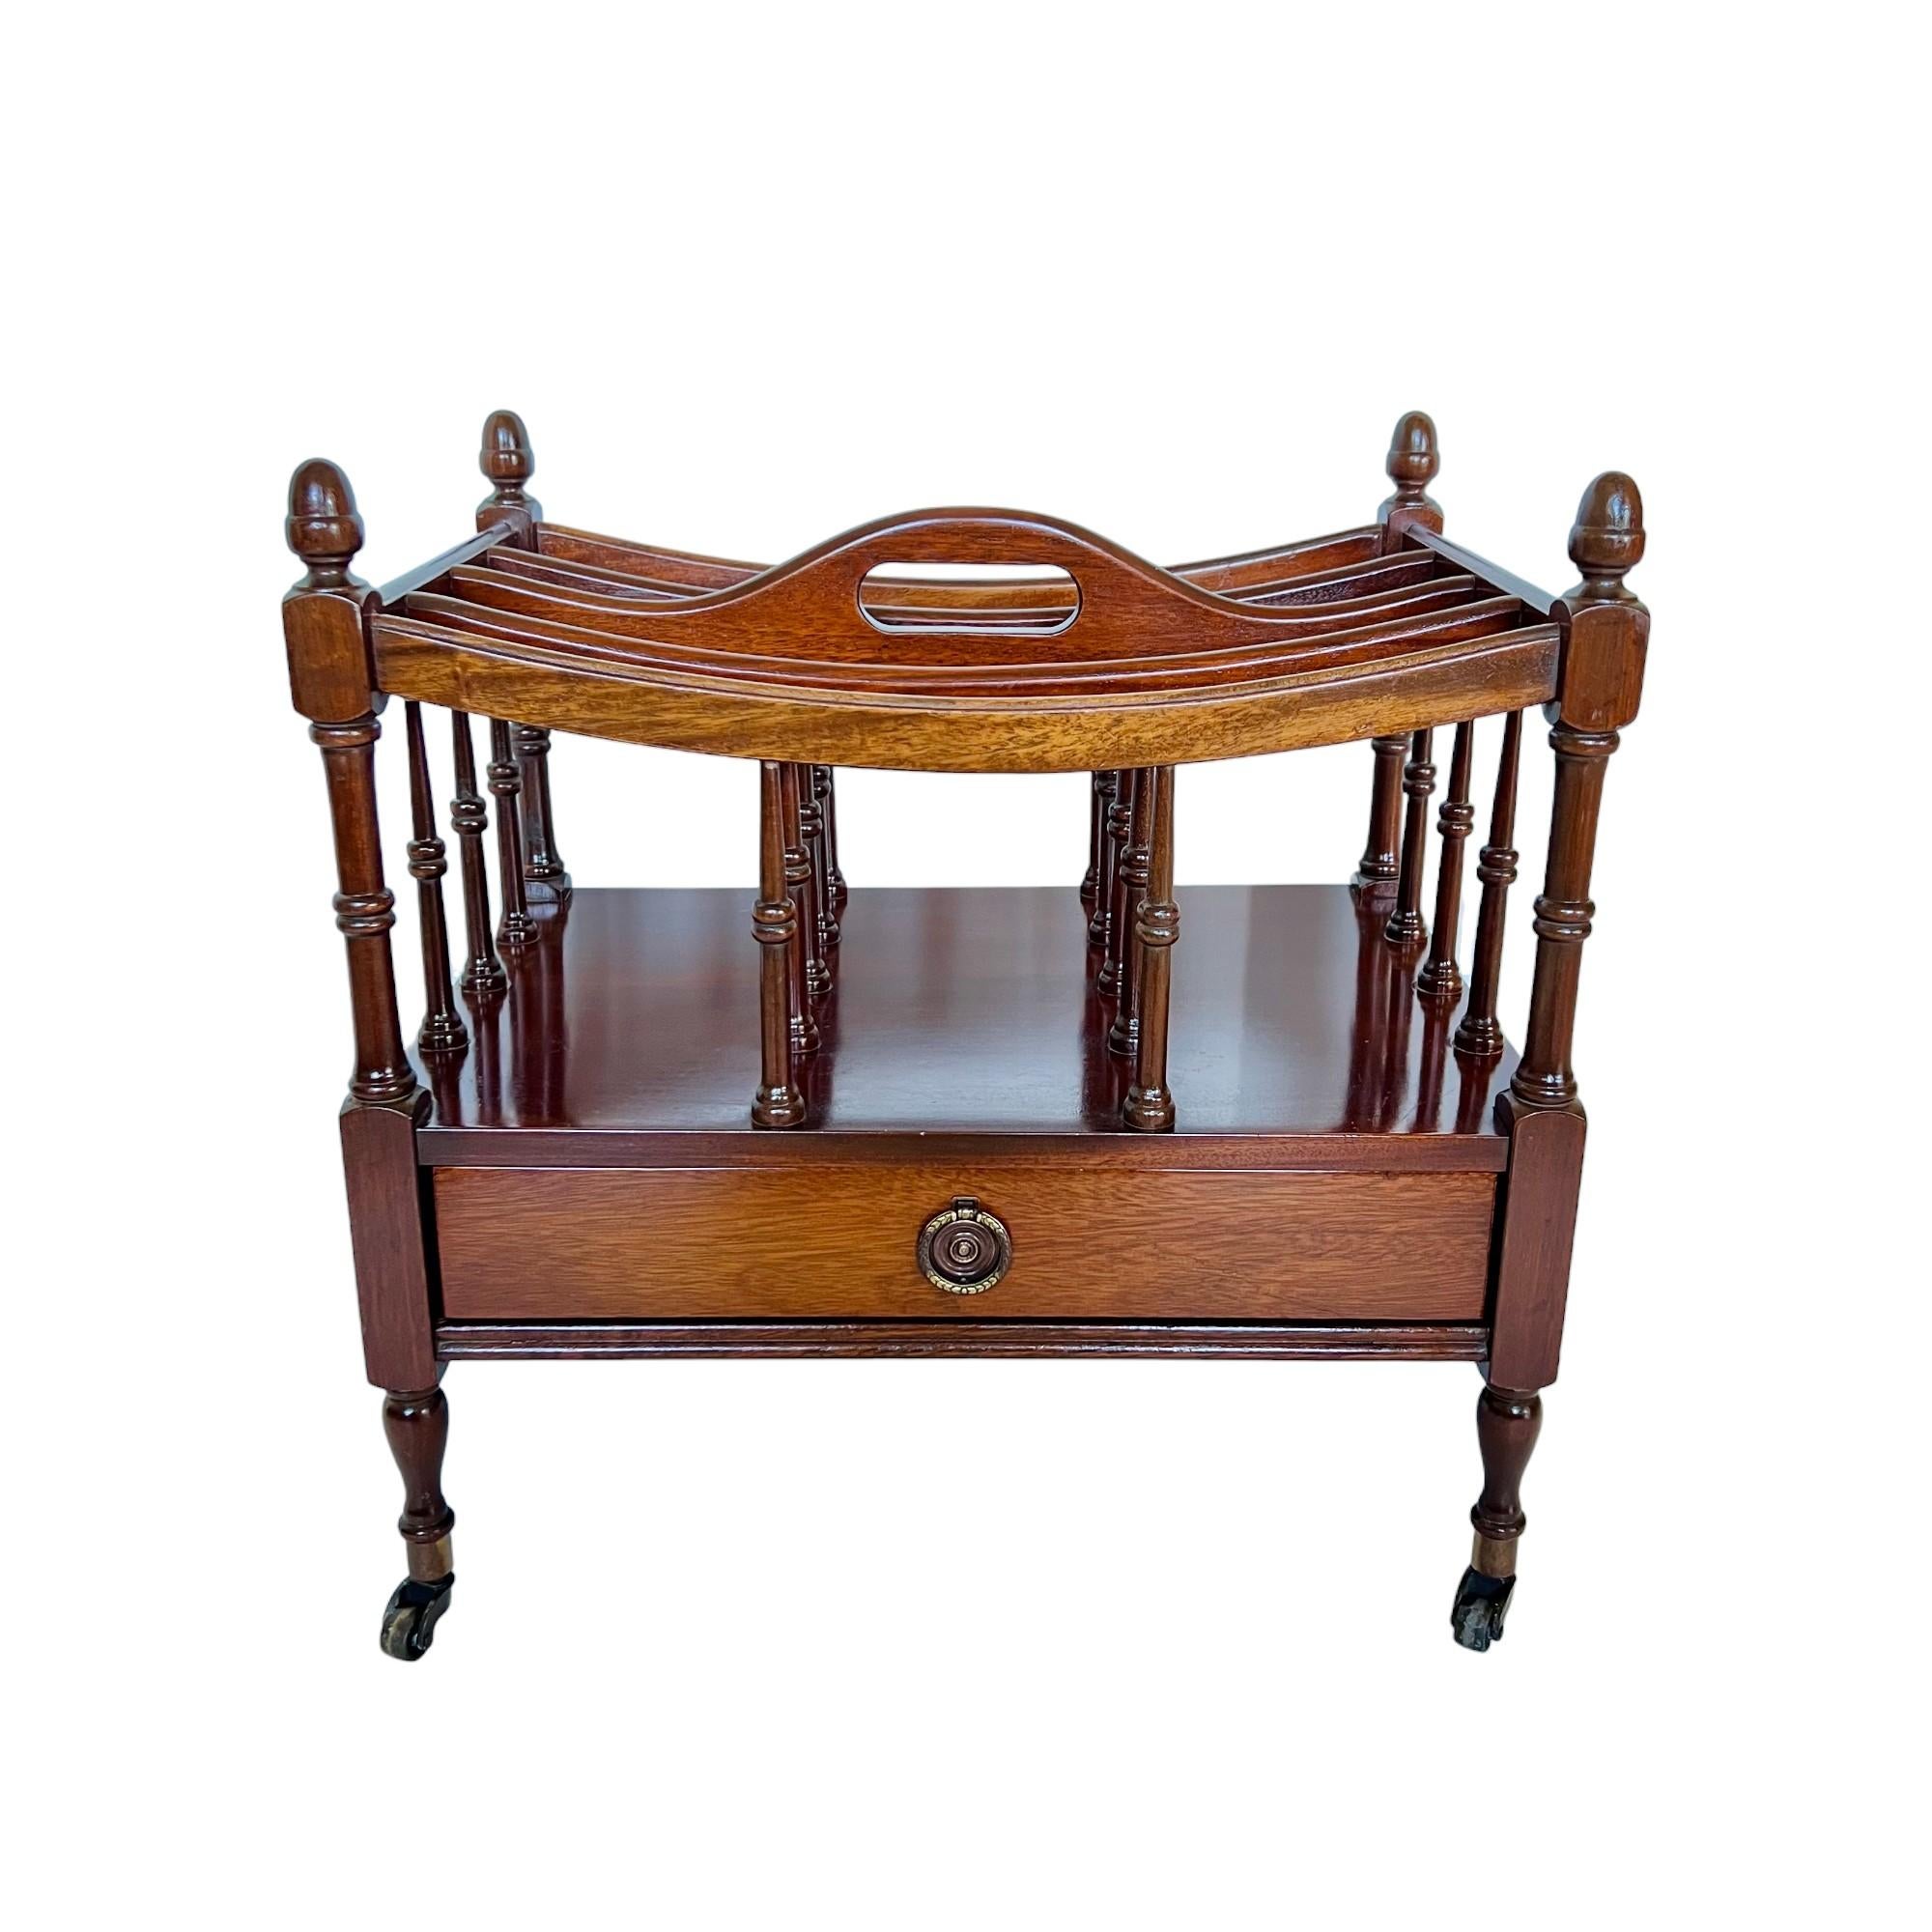 This lovely vintage English Regency style Canterbury magazine or sheet music rack is finely crafted of mahogany and features a single drawer with a brass ring pull, turned wood details and brass casters.

Dimensions: 19